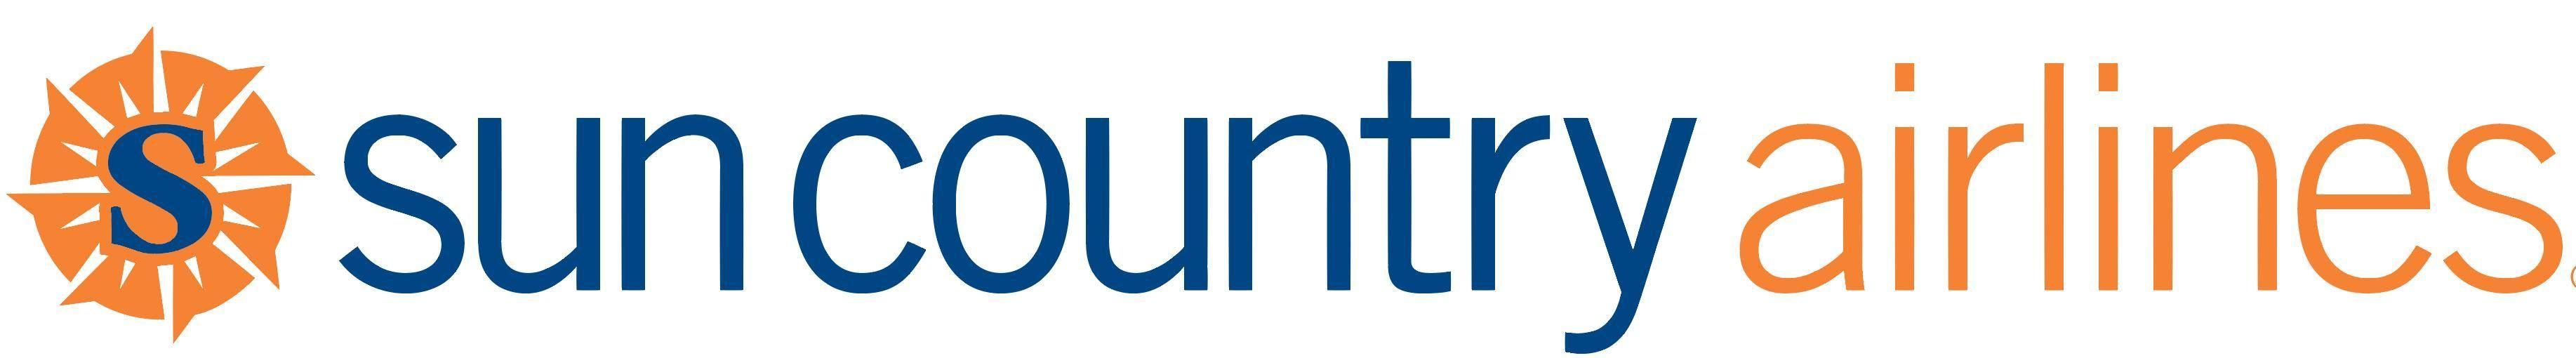 Country Airline Logo - Sun Country Competitors, Revenue and Employees Company Profile